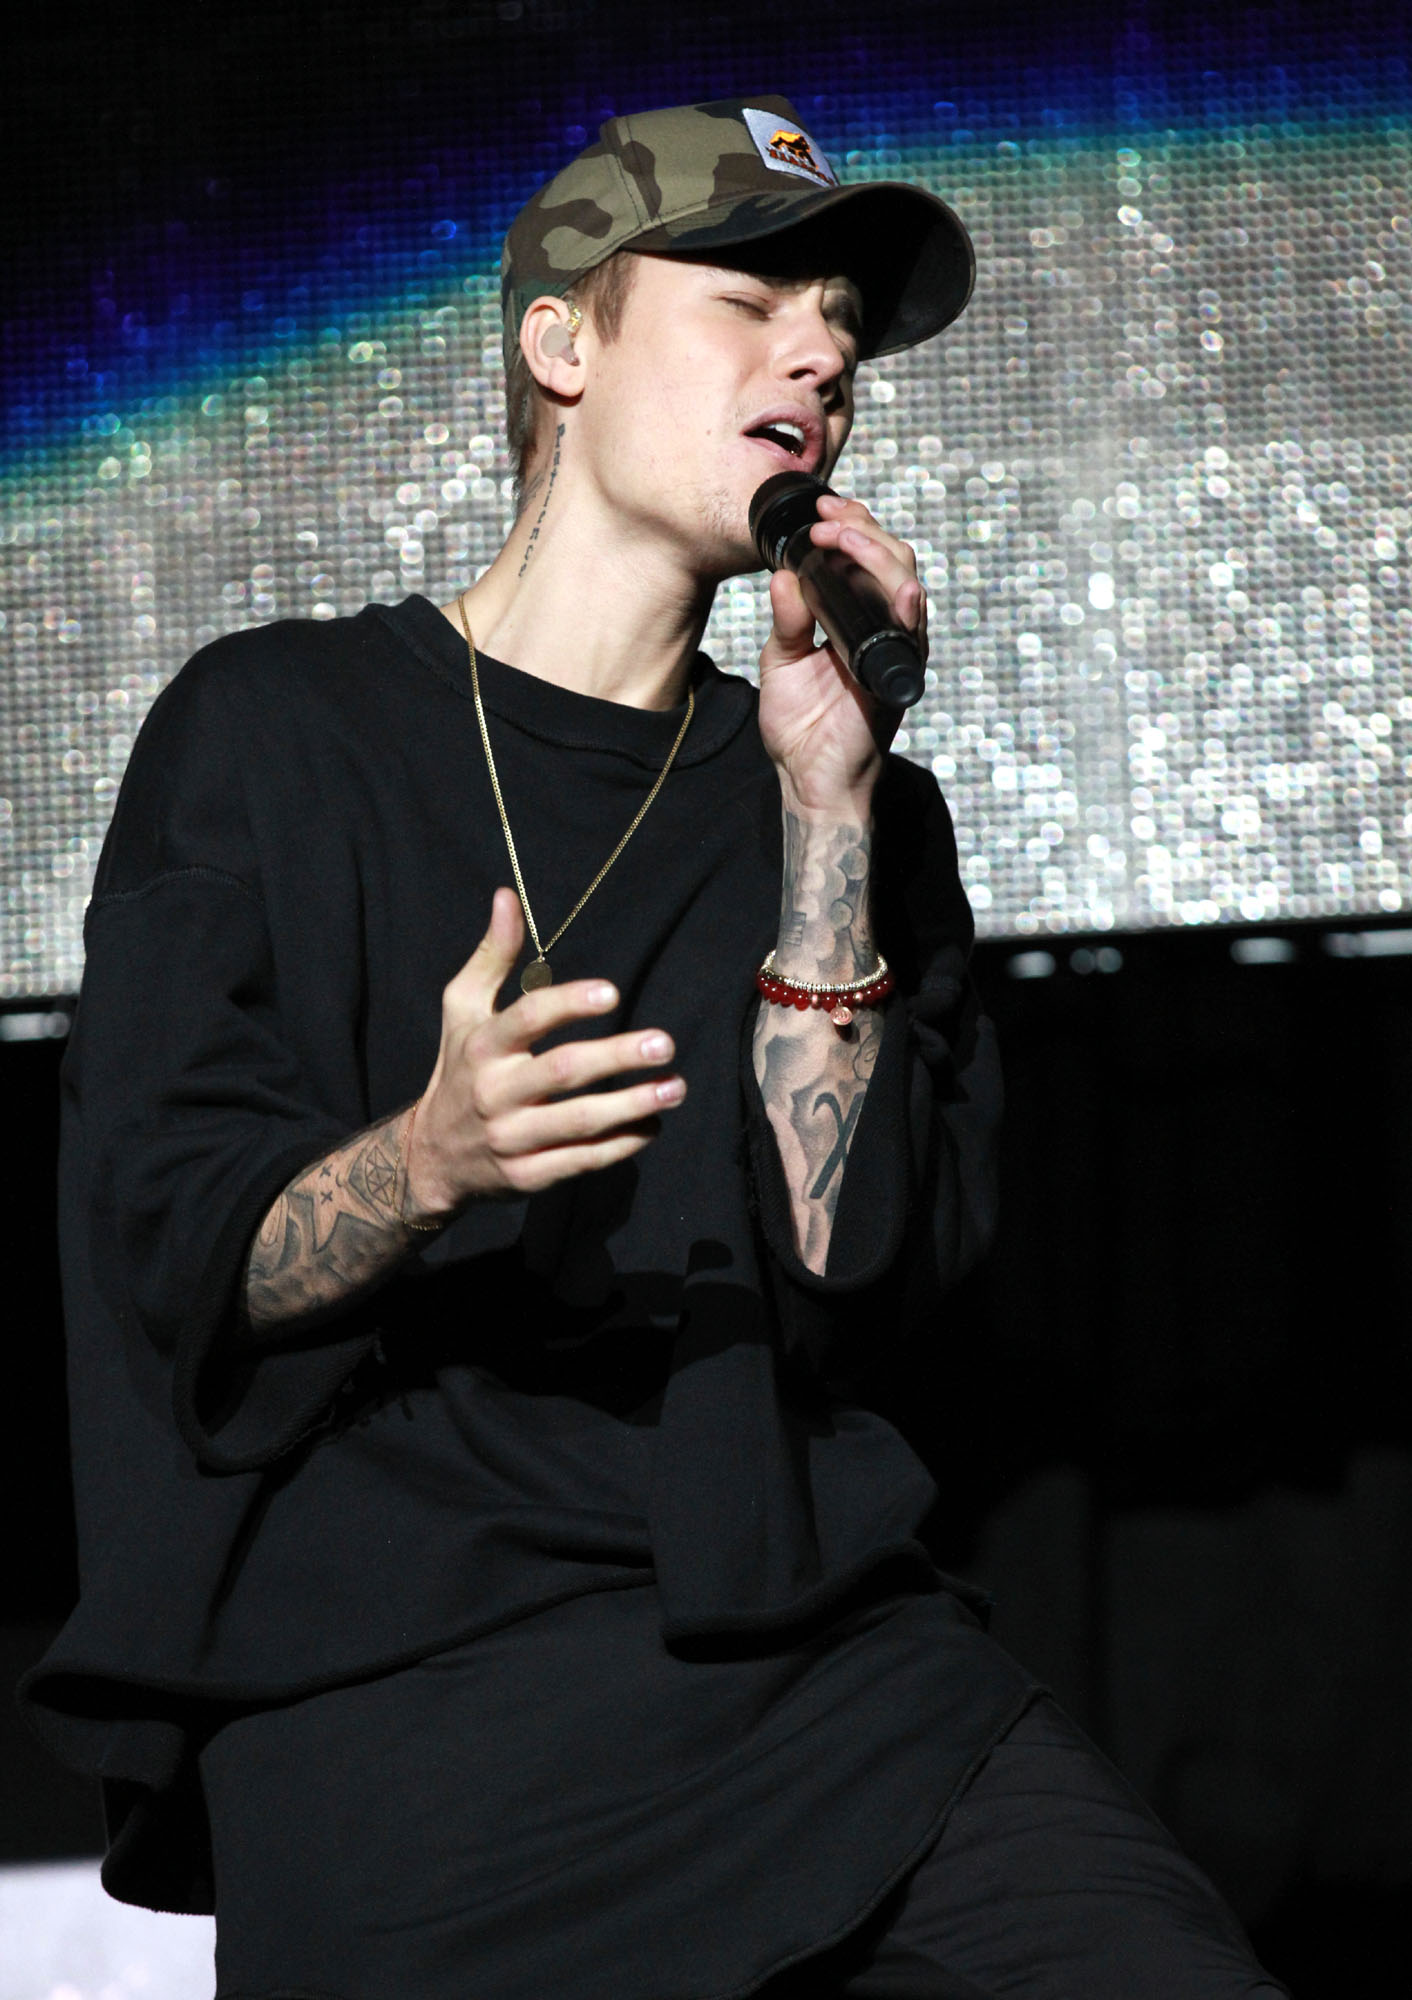 Justin Bieber - 'Where Are You Now' (Jingle Bell Ball 2015) 